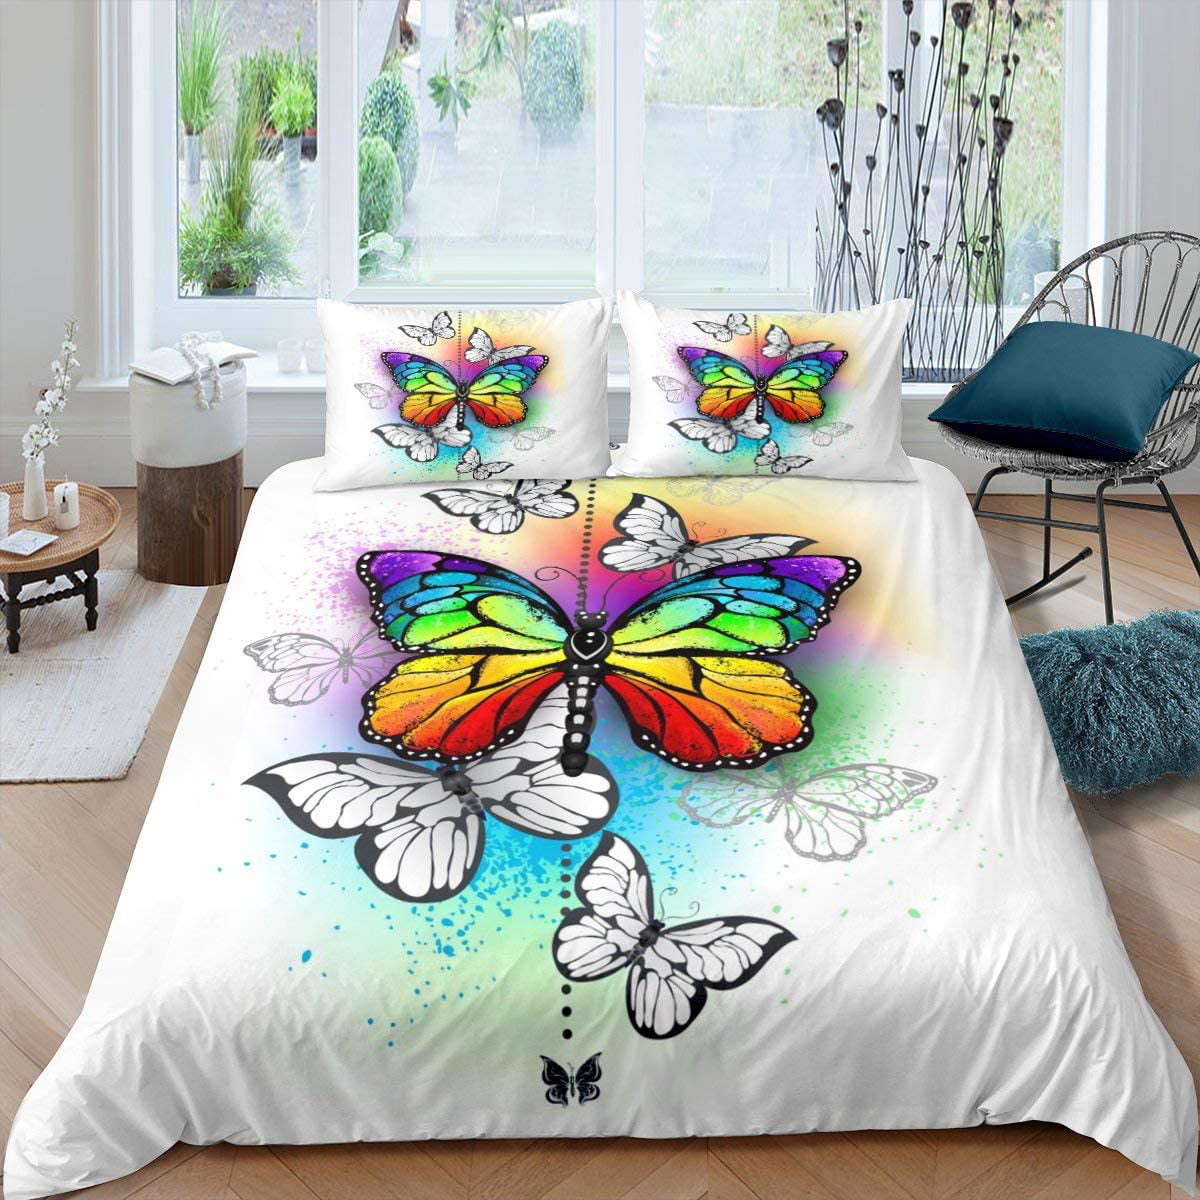 Girls Butterfly Bedspread Colorful Butterflies Lightweight Coverlet for Kids Boys Multicolor Dreamy Animal Quilt Set Chic Marble Girly Pink Decor Bedding Cover with 1 Pillowcase 2Pcs Bedding Twin